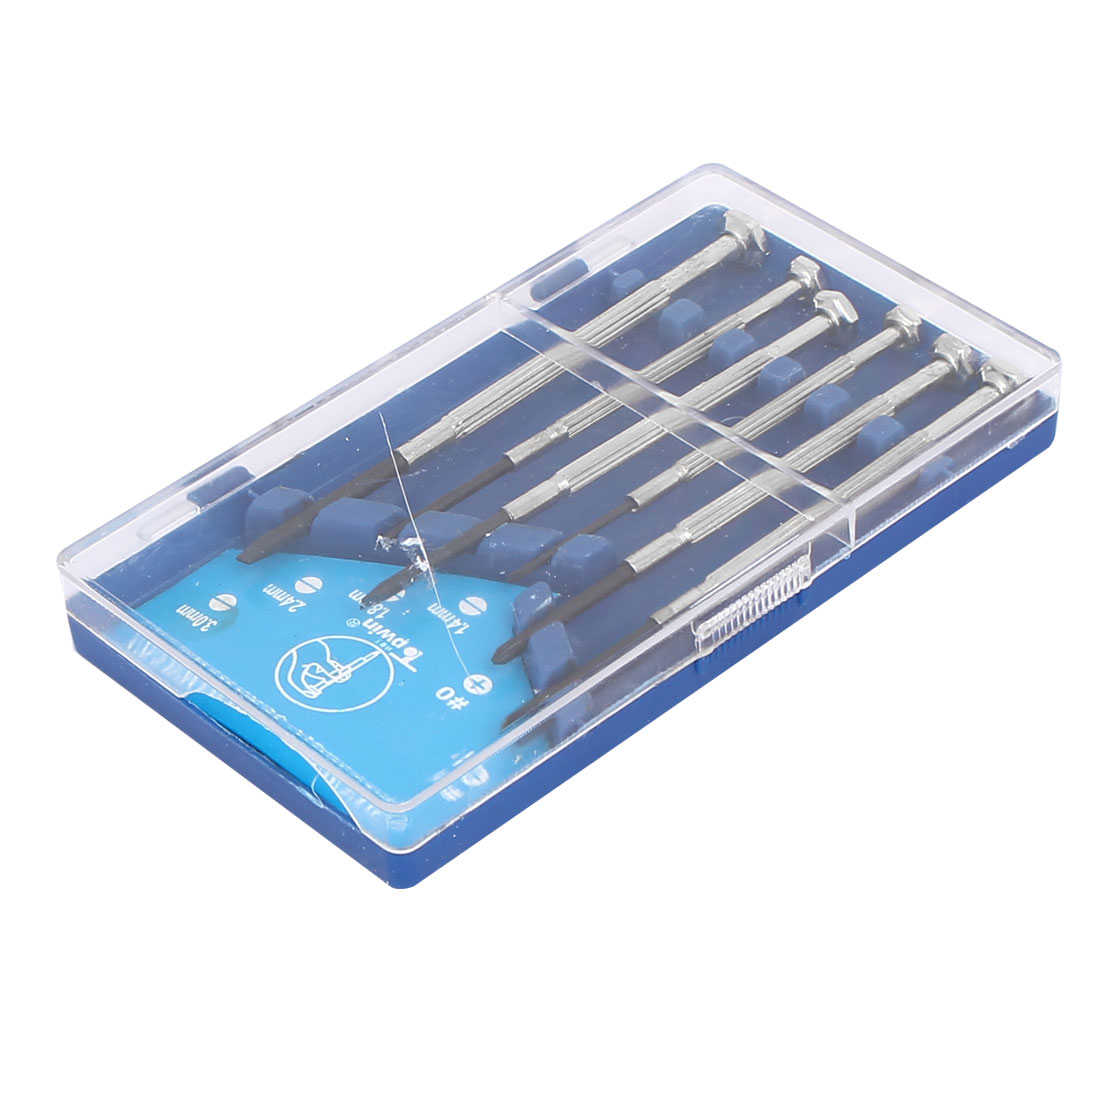 Watch Electronic Precision Phillips Slotted Screwdrivers Repair Tool Set 6 in 1